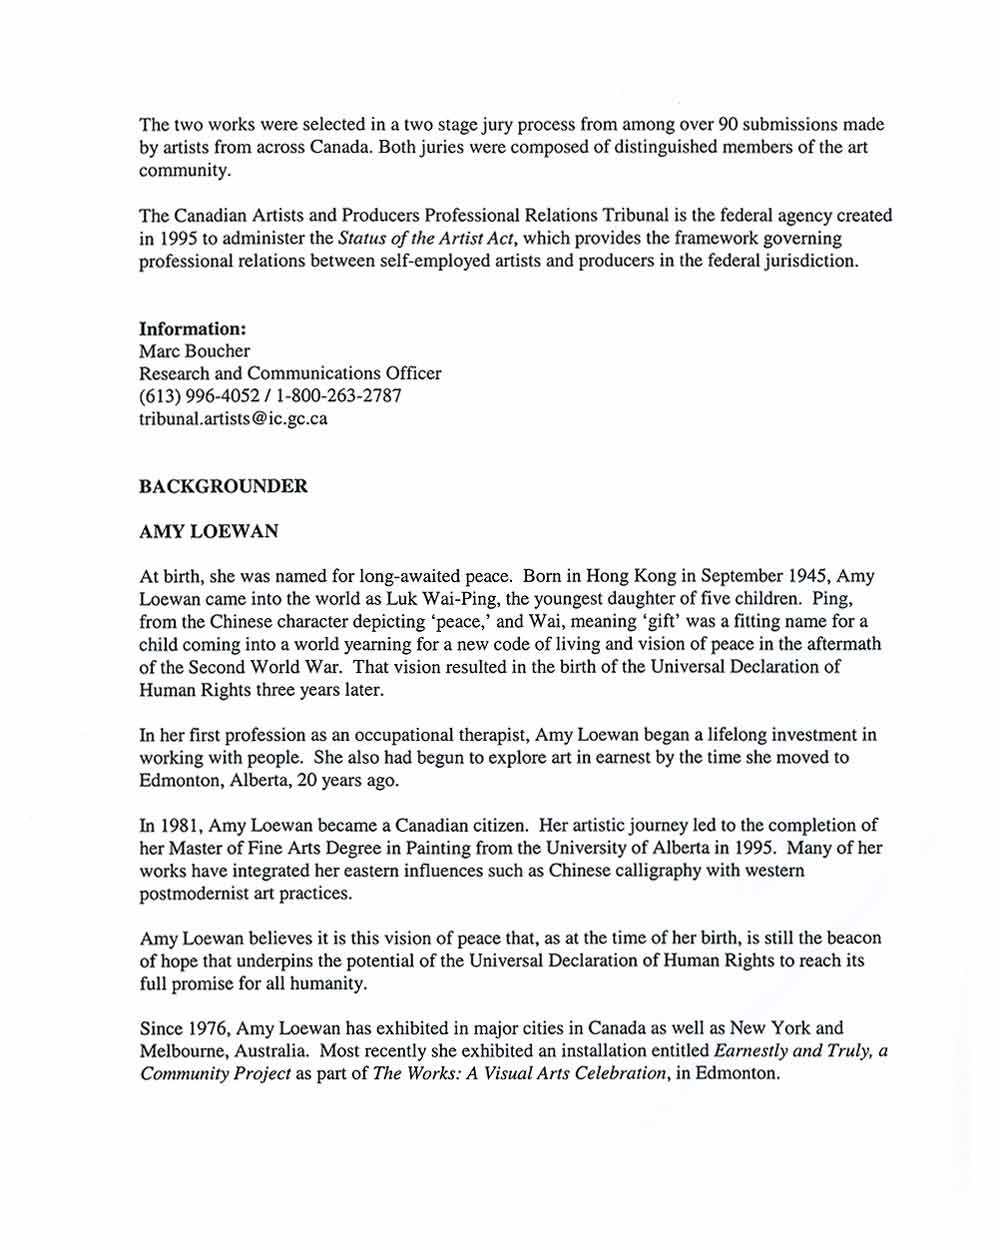 Press release from Canadian Artists and Producers Professional Relations Tribunal, pg 2